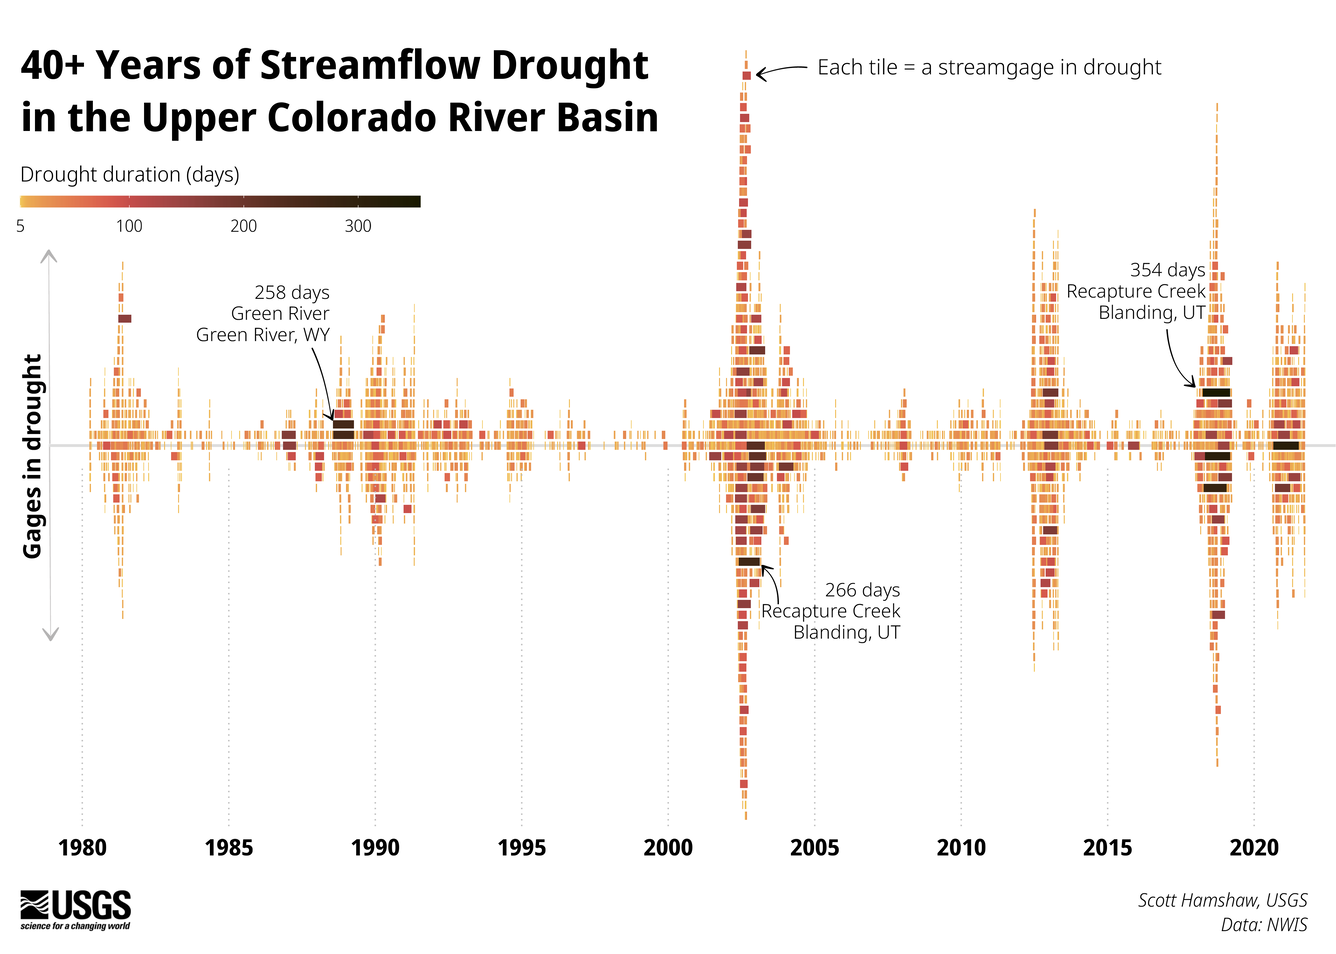 A time series of streamflow drought events occurring across 122 stream gages in the Upper Colorado River basin